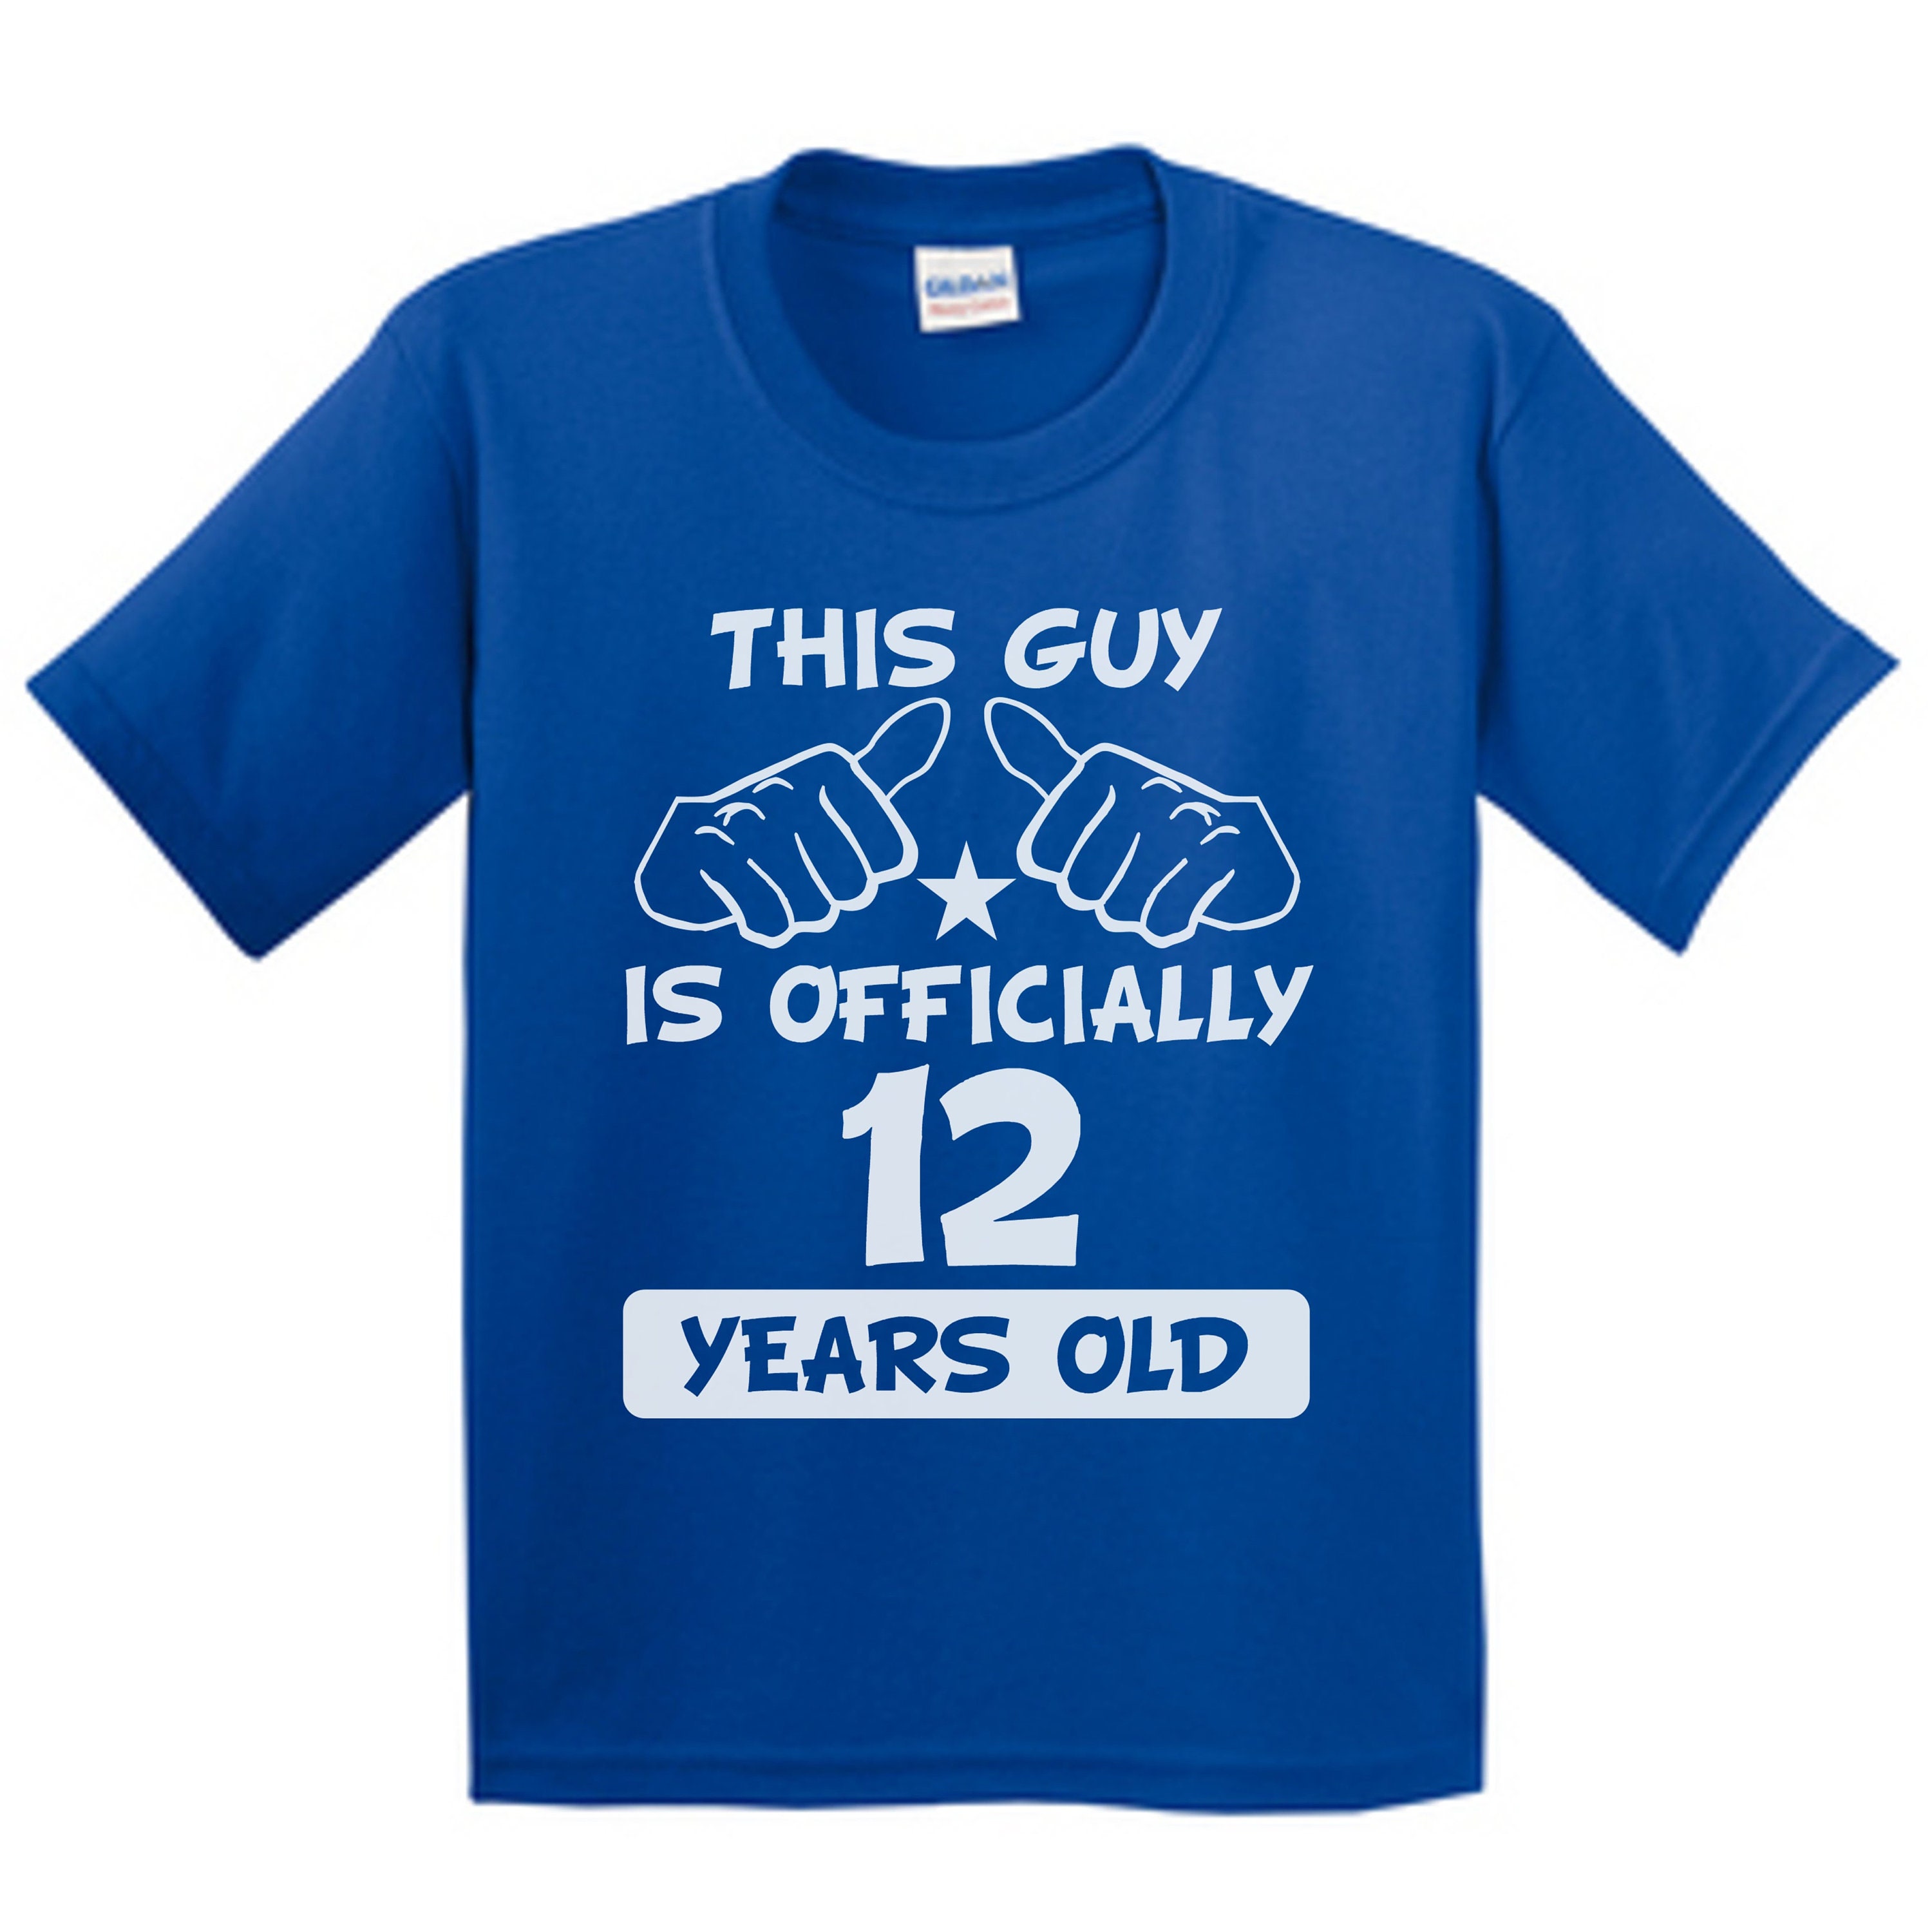 Boys 12th Birthday Shirt - This Guy Is Officially 12 Years Old Kids T-Shirt by Really Awesome Shirts